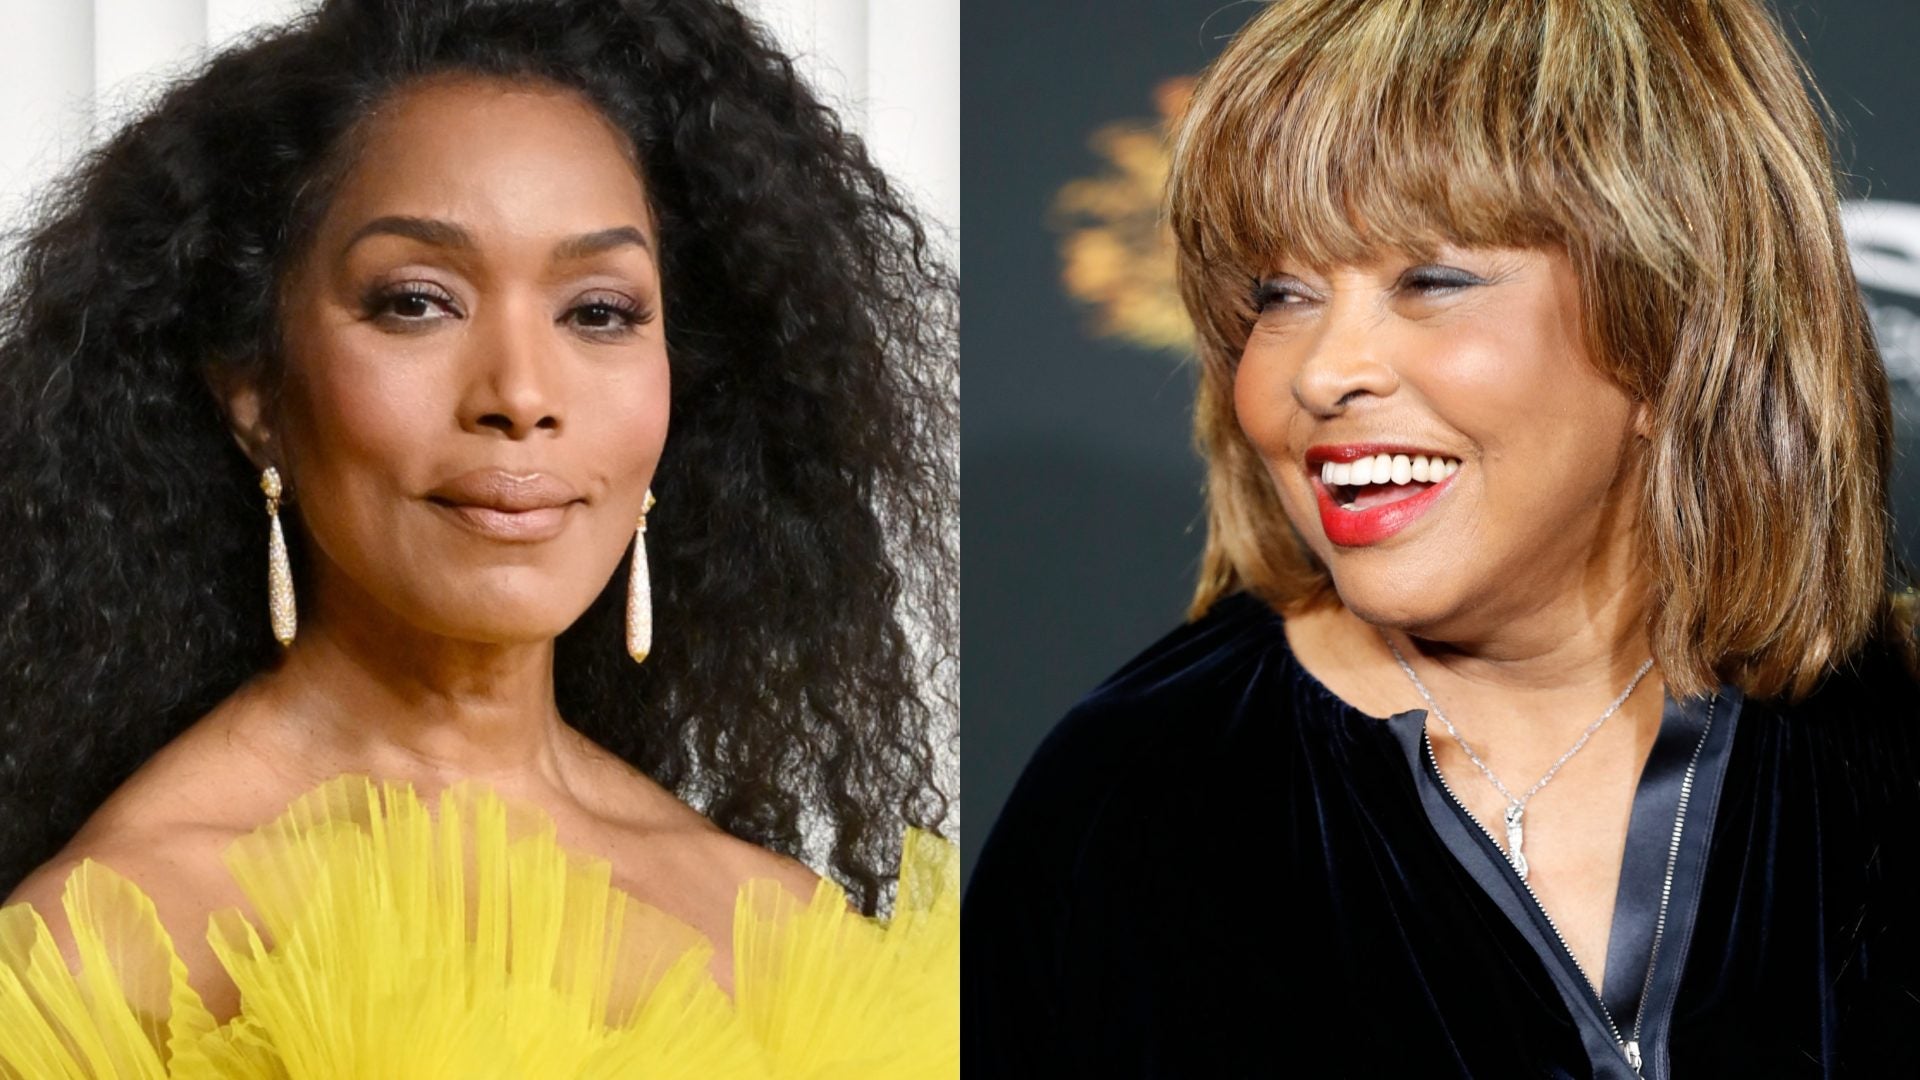 Angela Bassett Speaks Out On The Passing Of Tina Turner: "She Gave Us Her Whole Self"